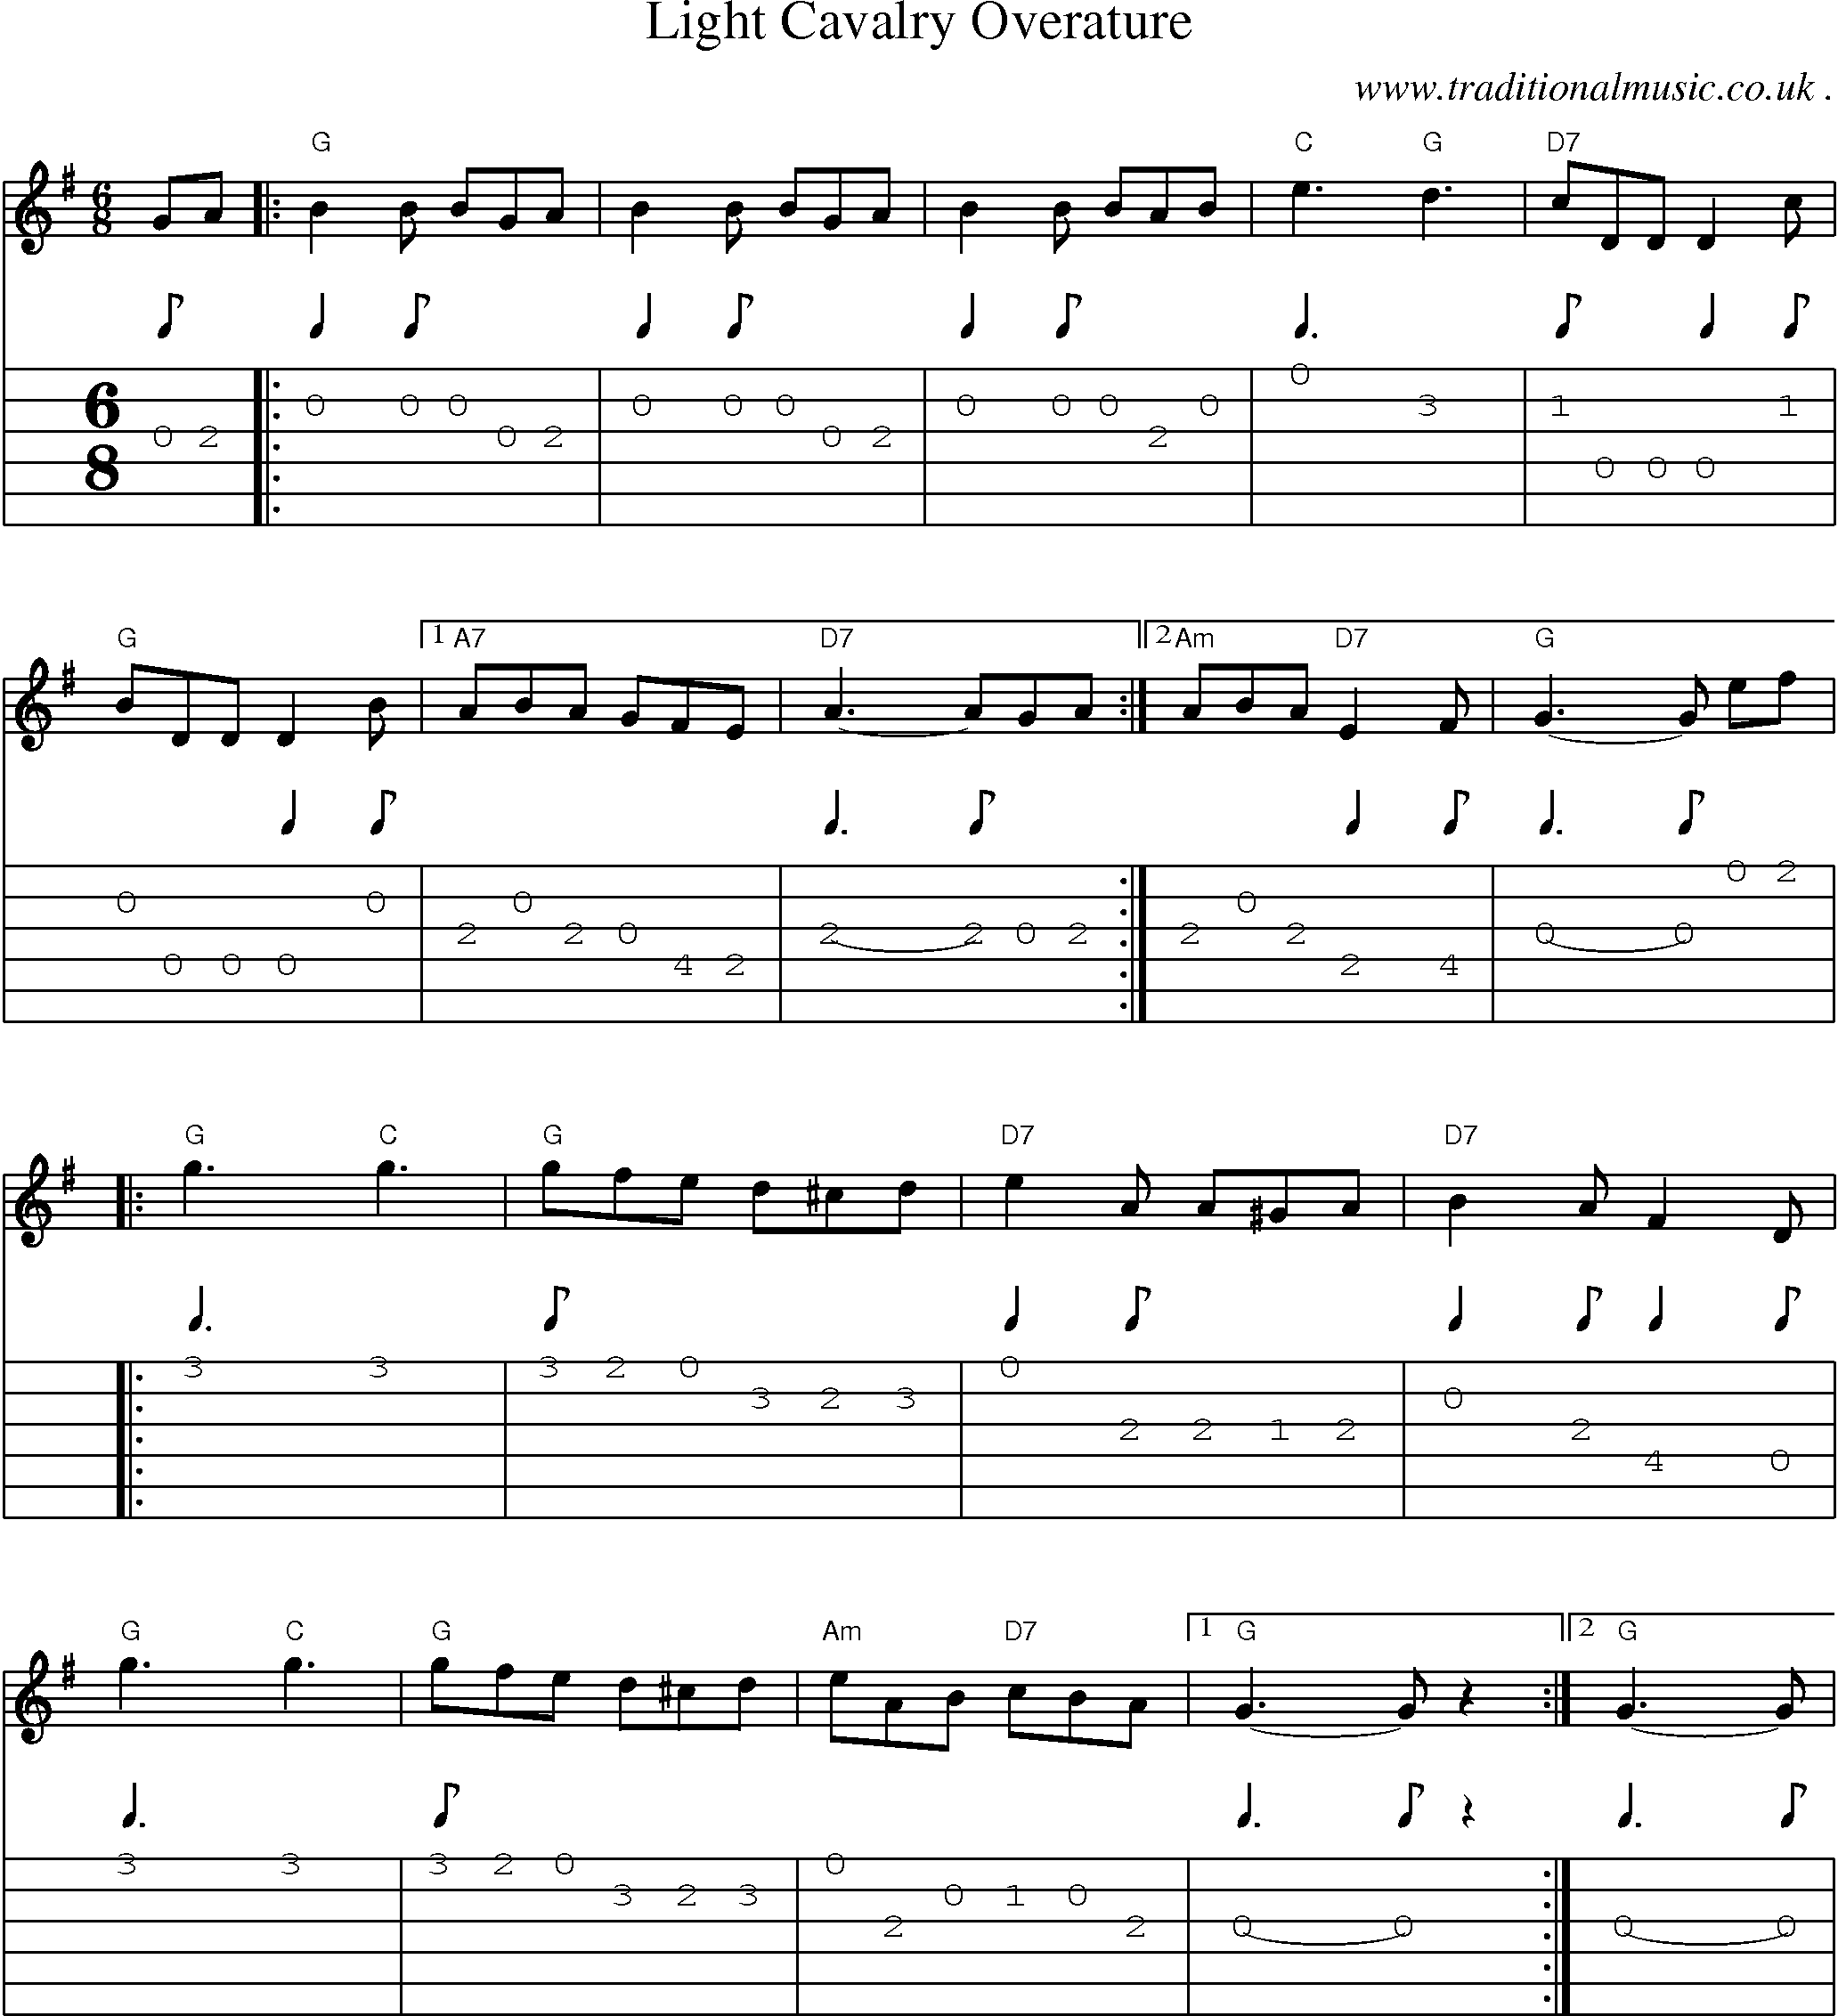 Music Score and Guitar Tabs for Light Cavalry Overature